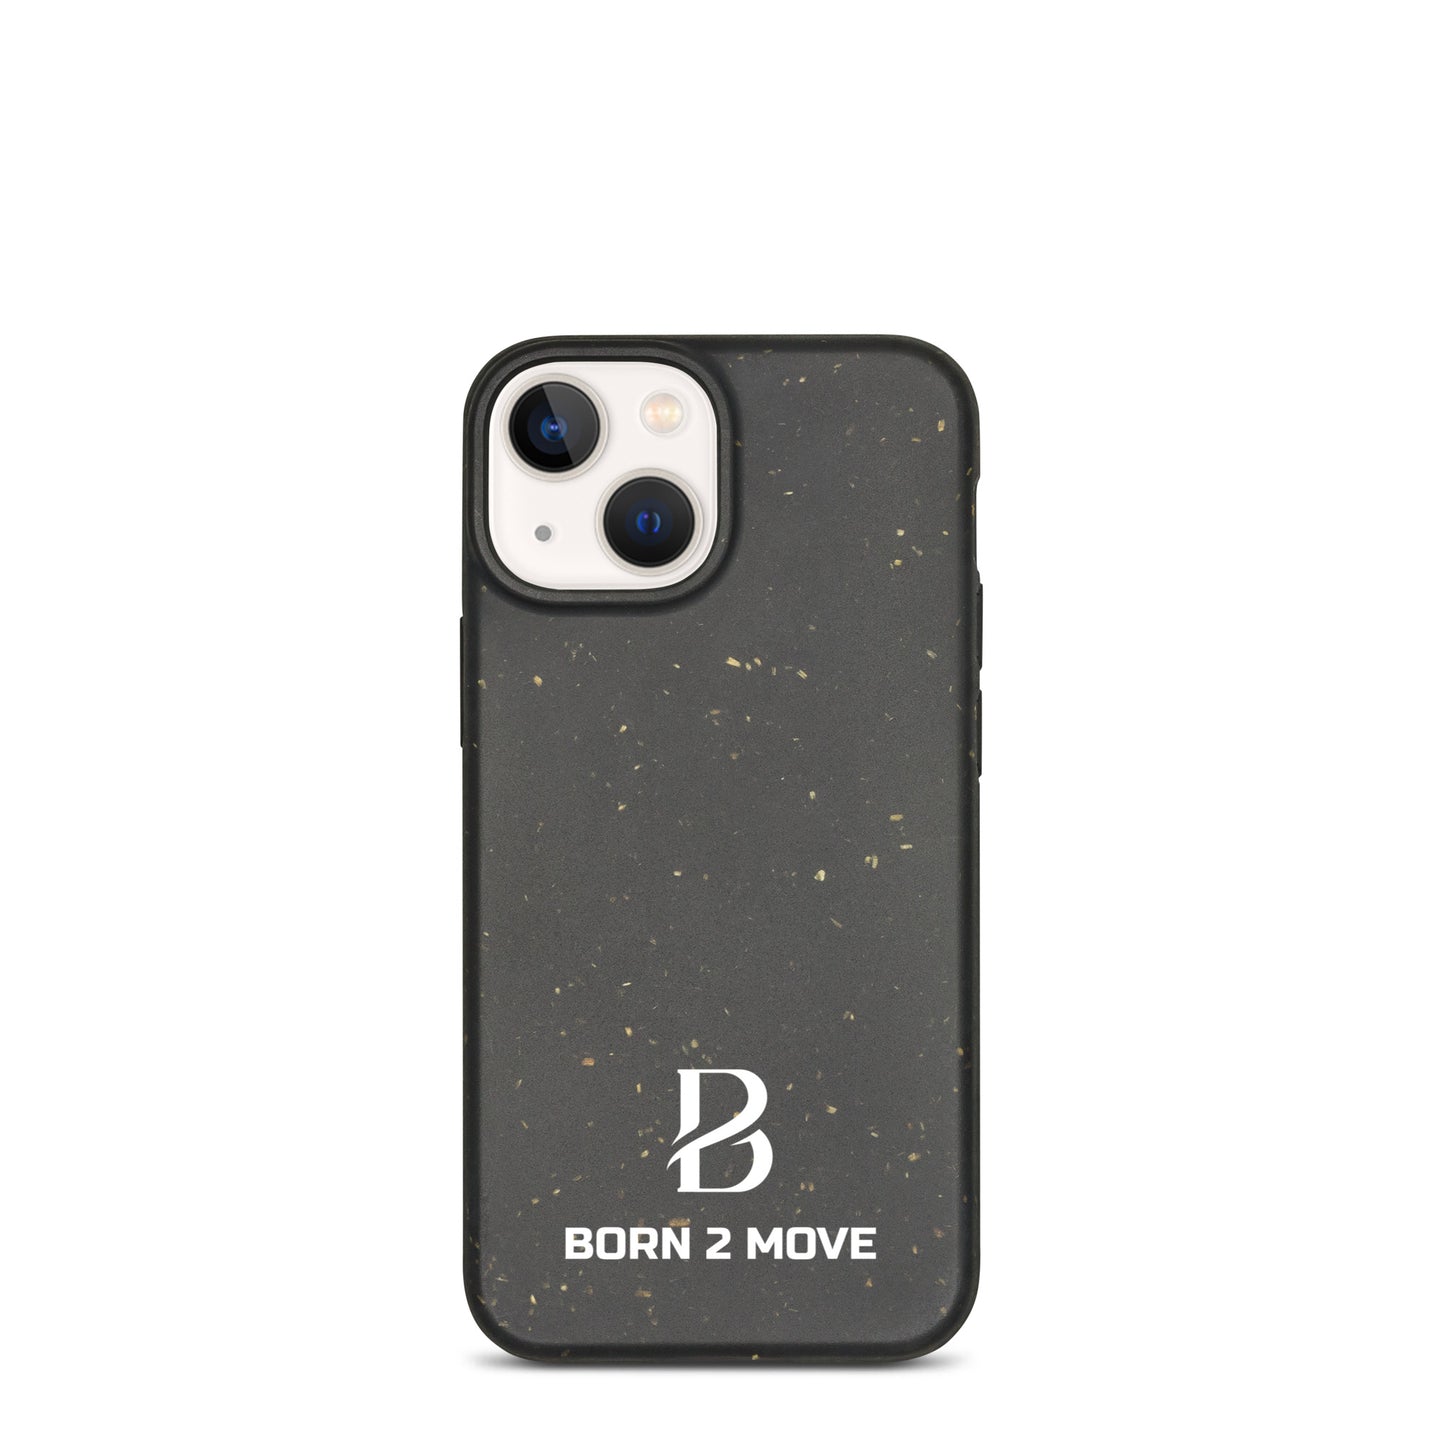 White Logo "Norn 2 Move" Speckled iPhone Case